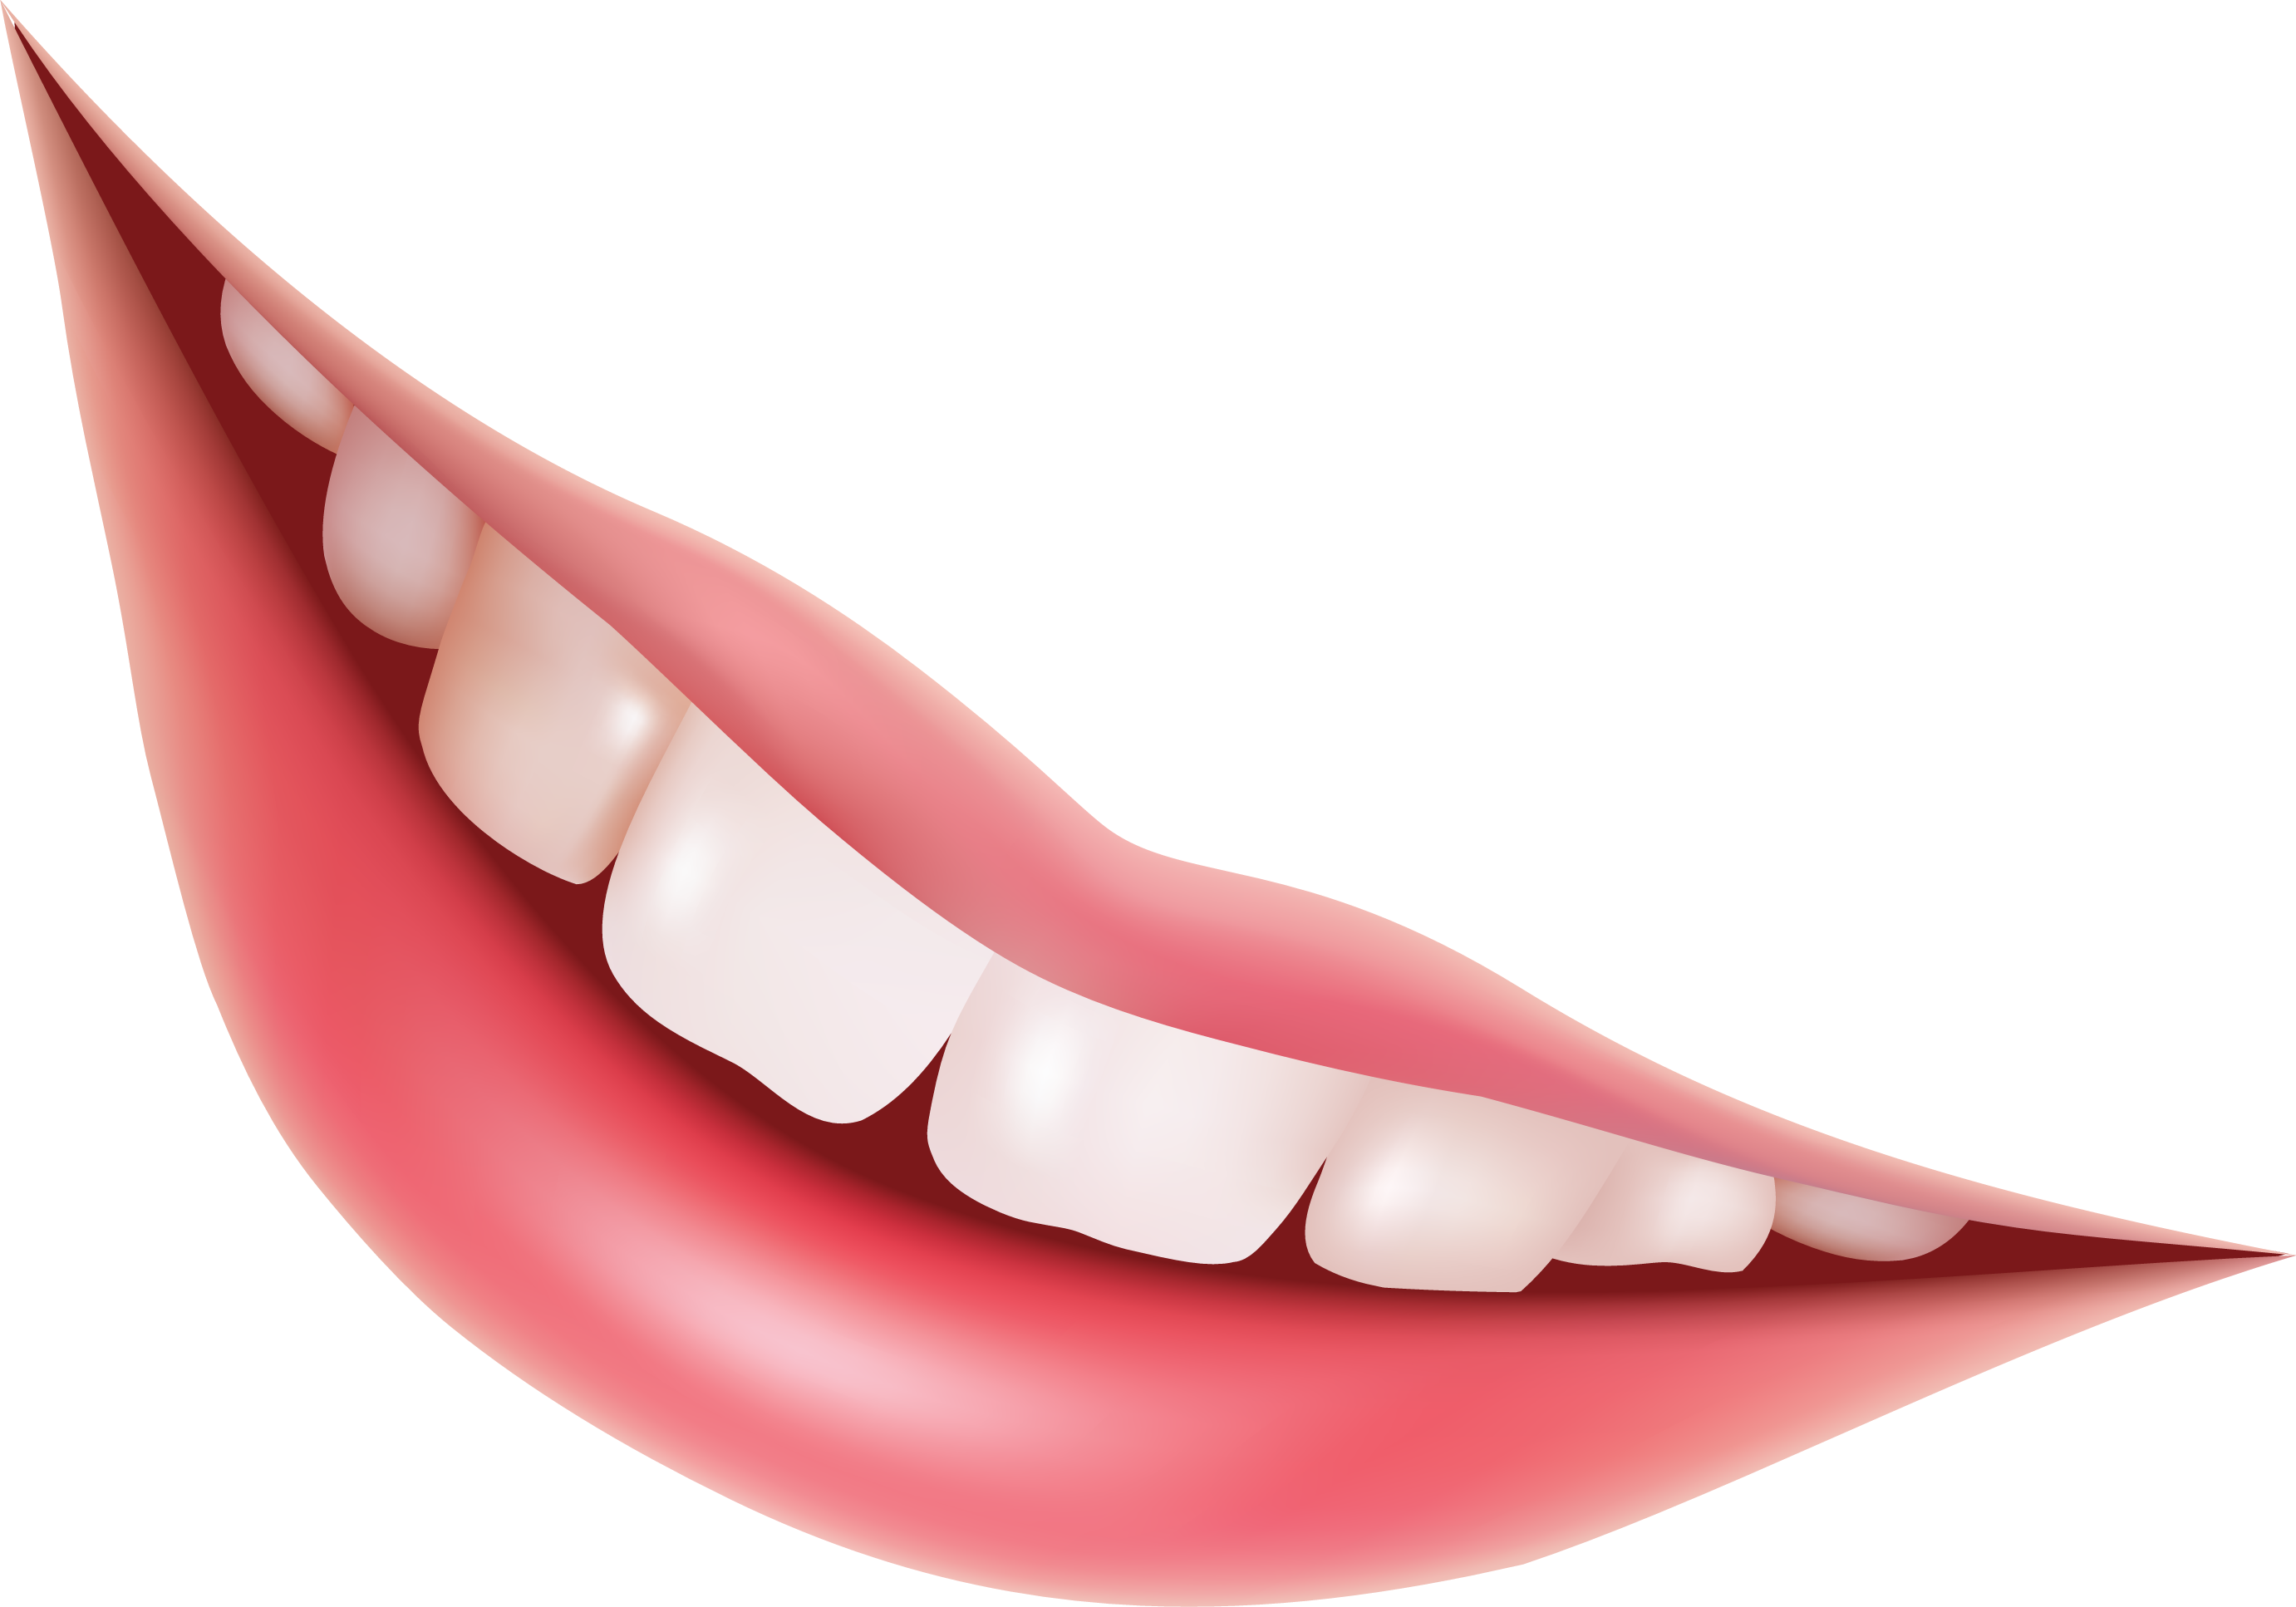 toothy smile clipart - photo #49